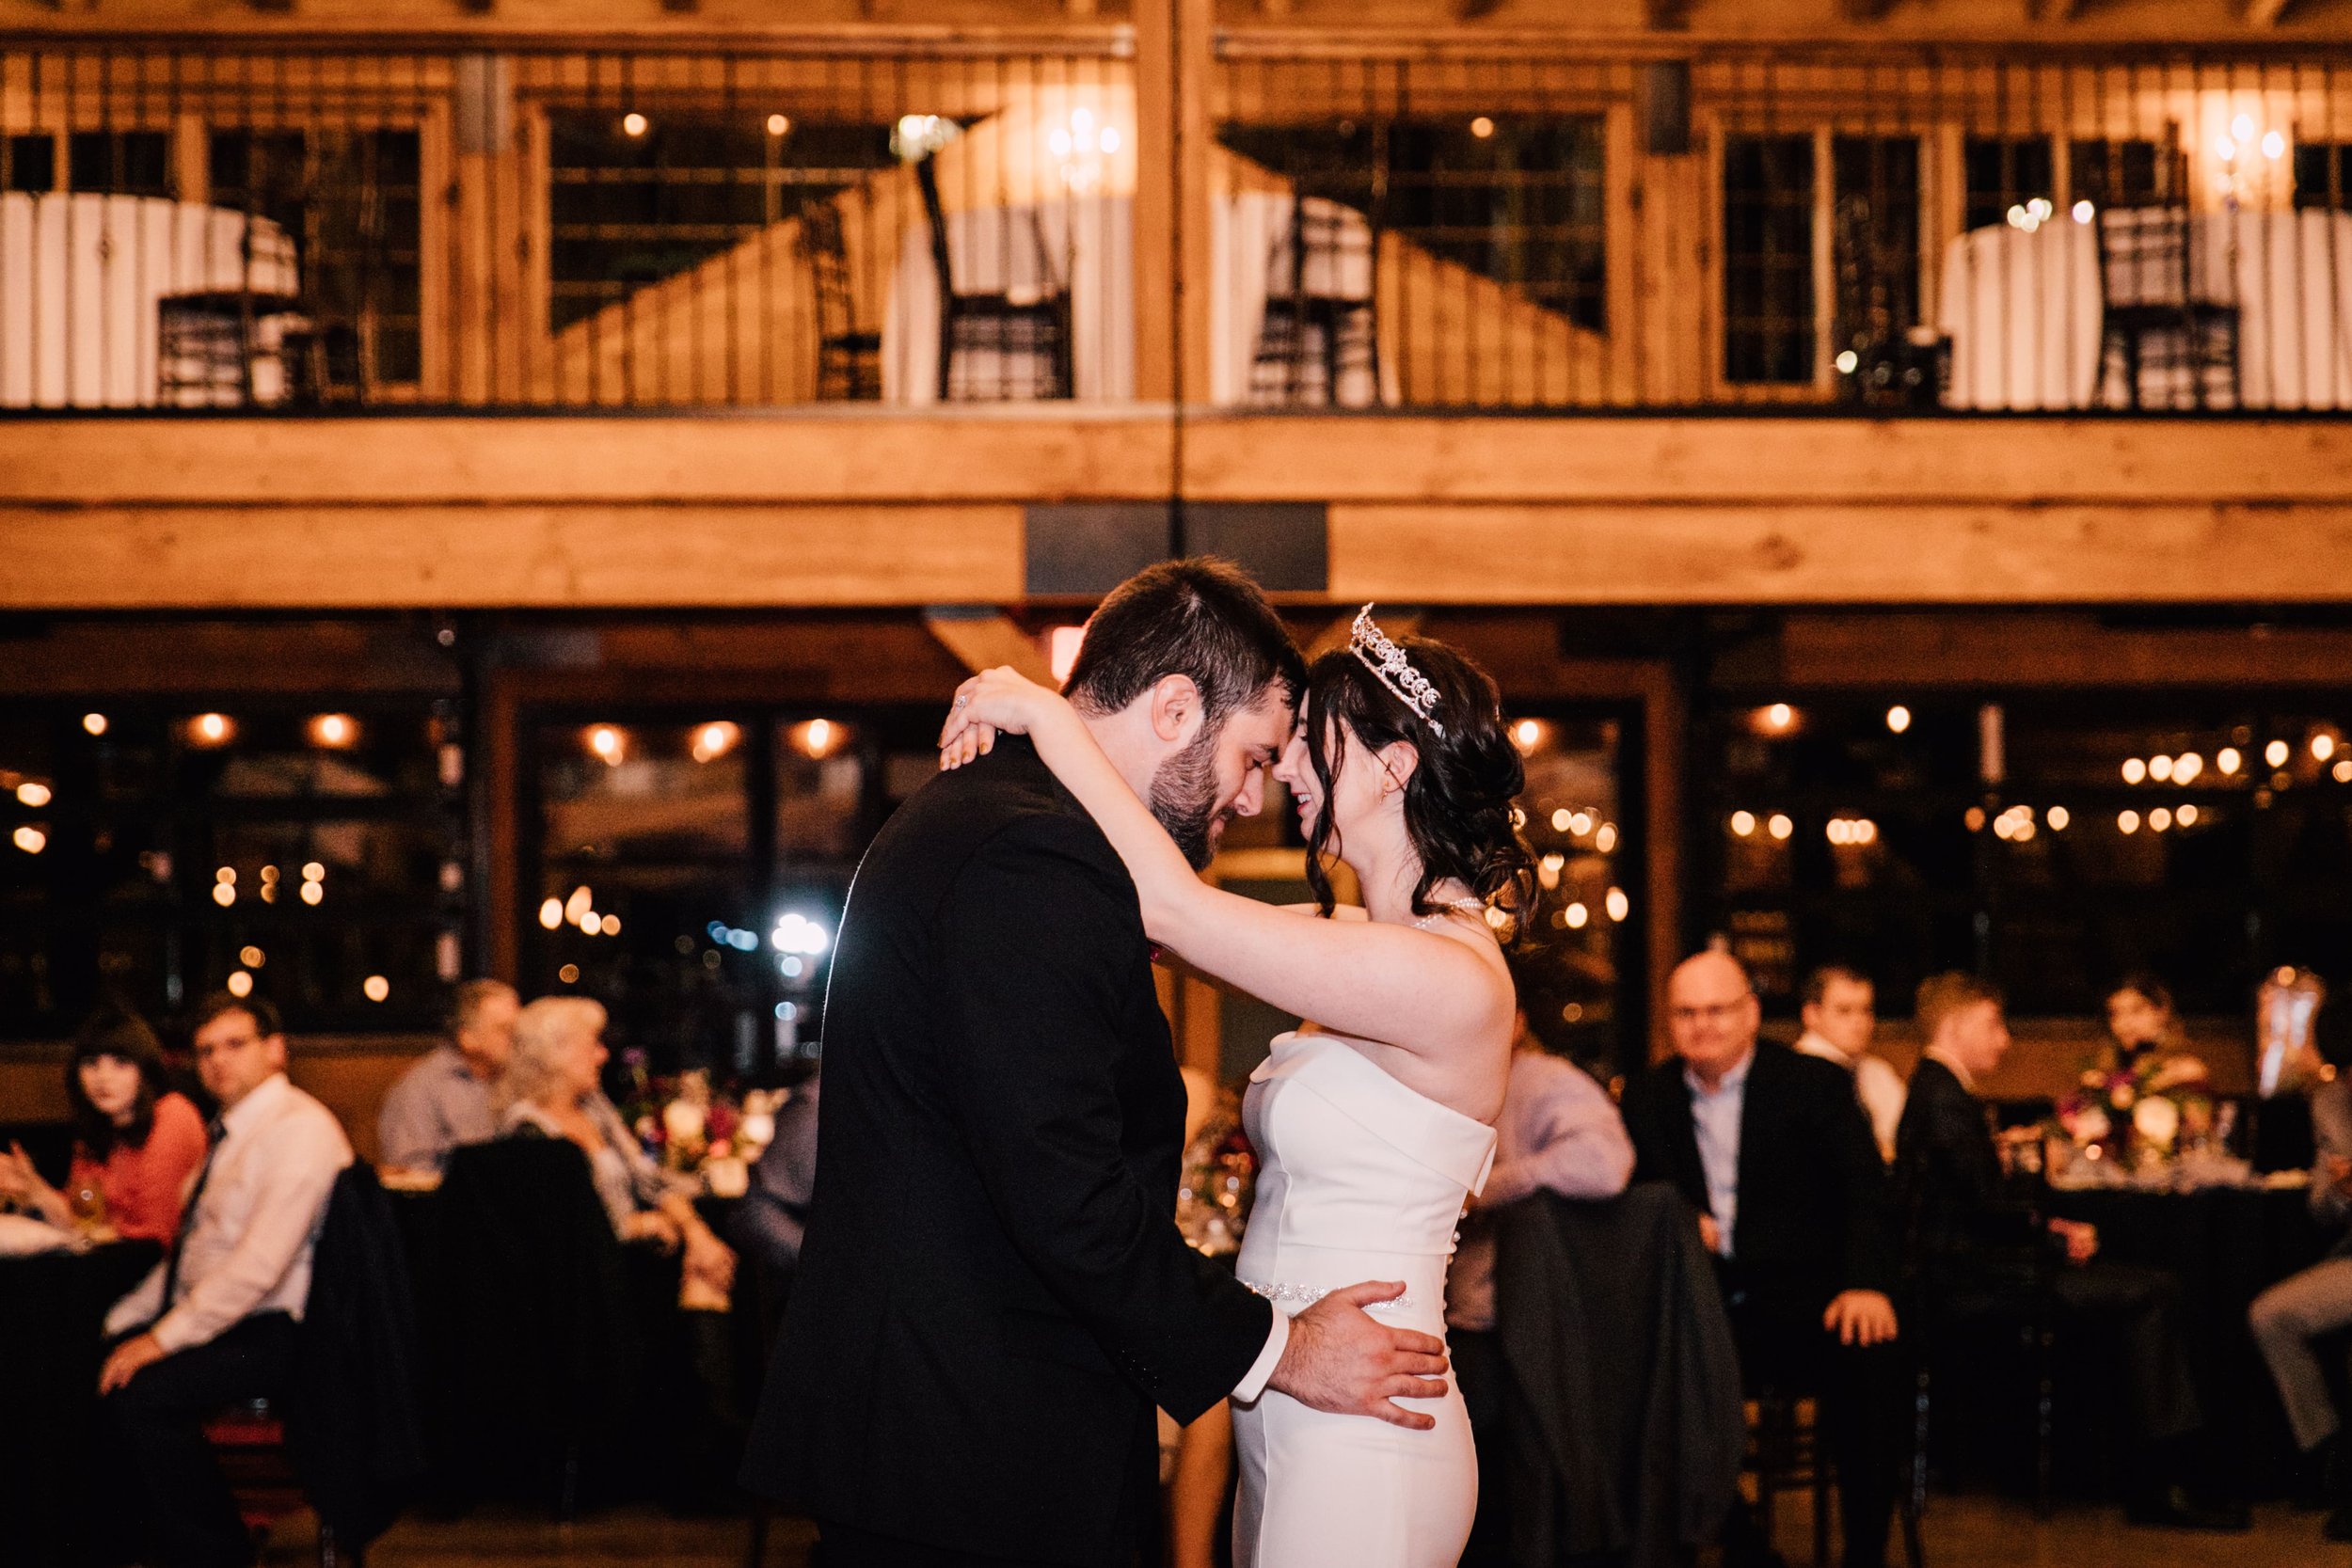  the bride and groom press their foreheads together as they share their first dance at their starry night wedding 